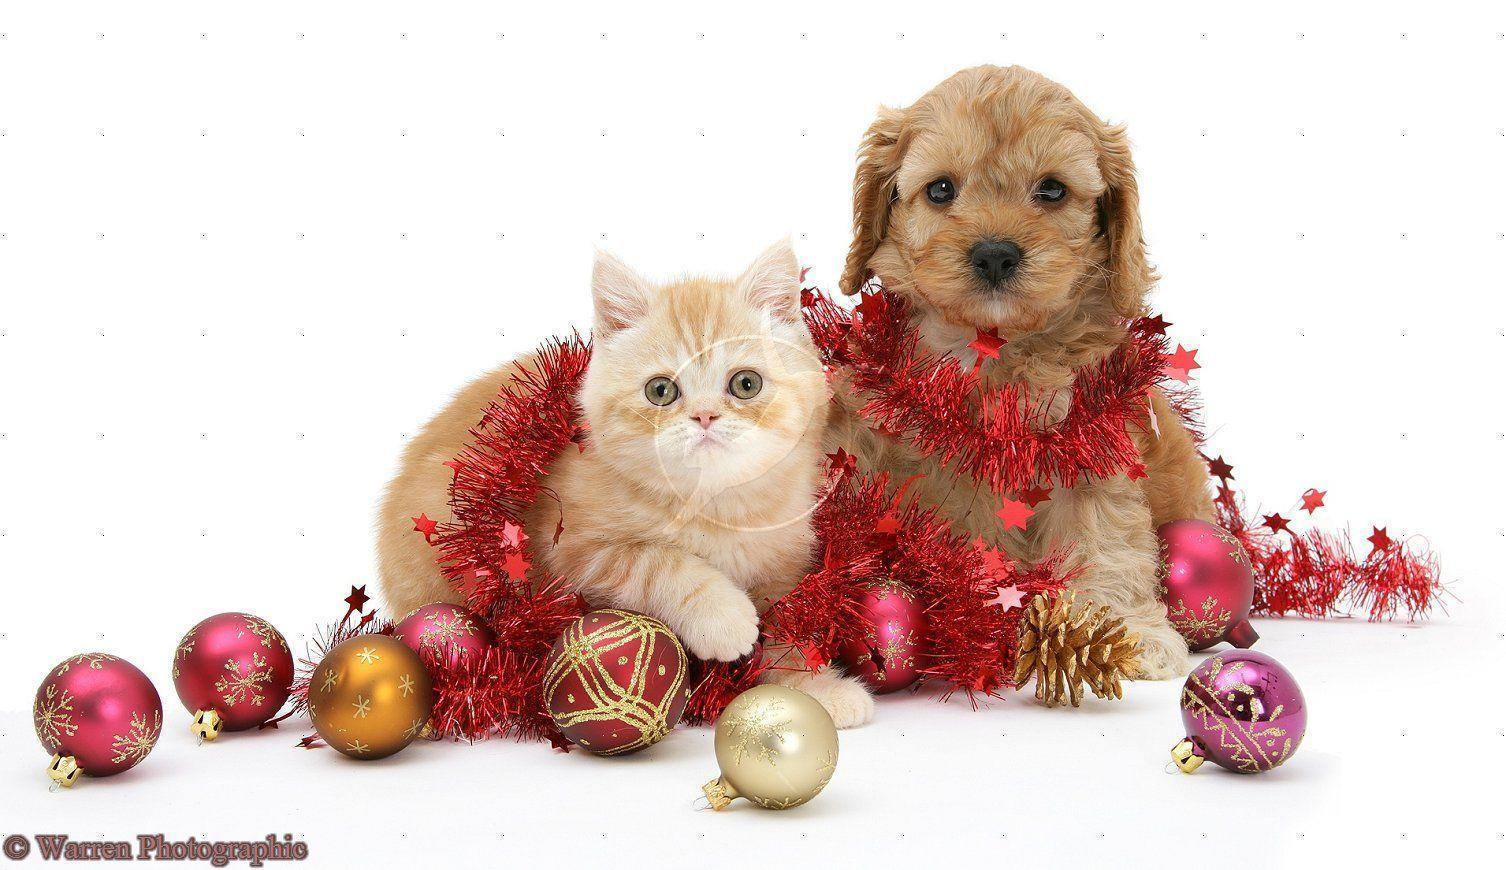 Cute Christmas Kittens And Puppies 9683 HD Wallpaper